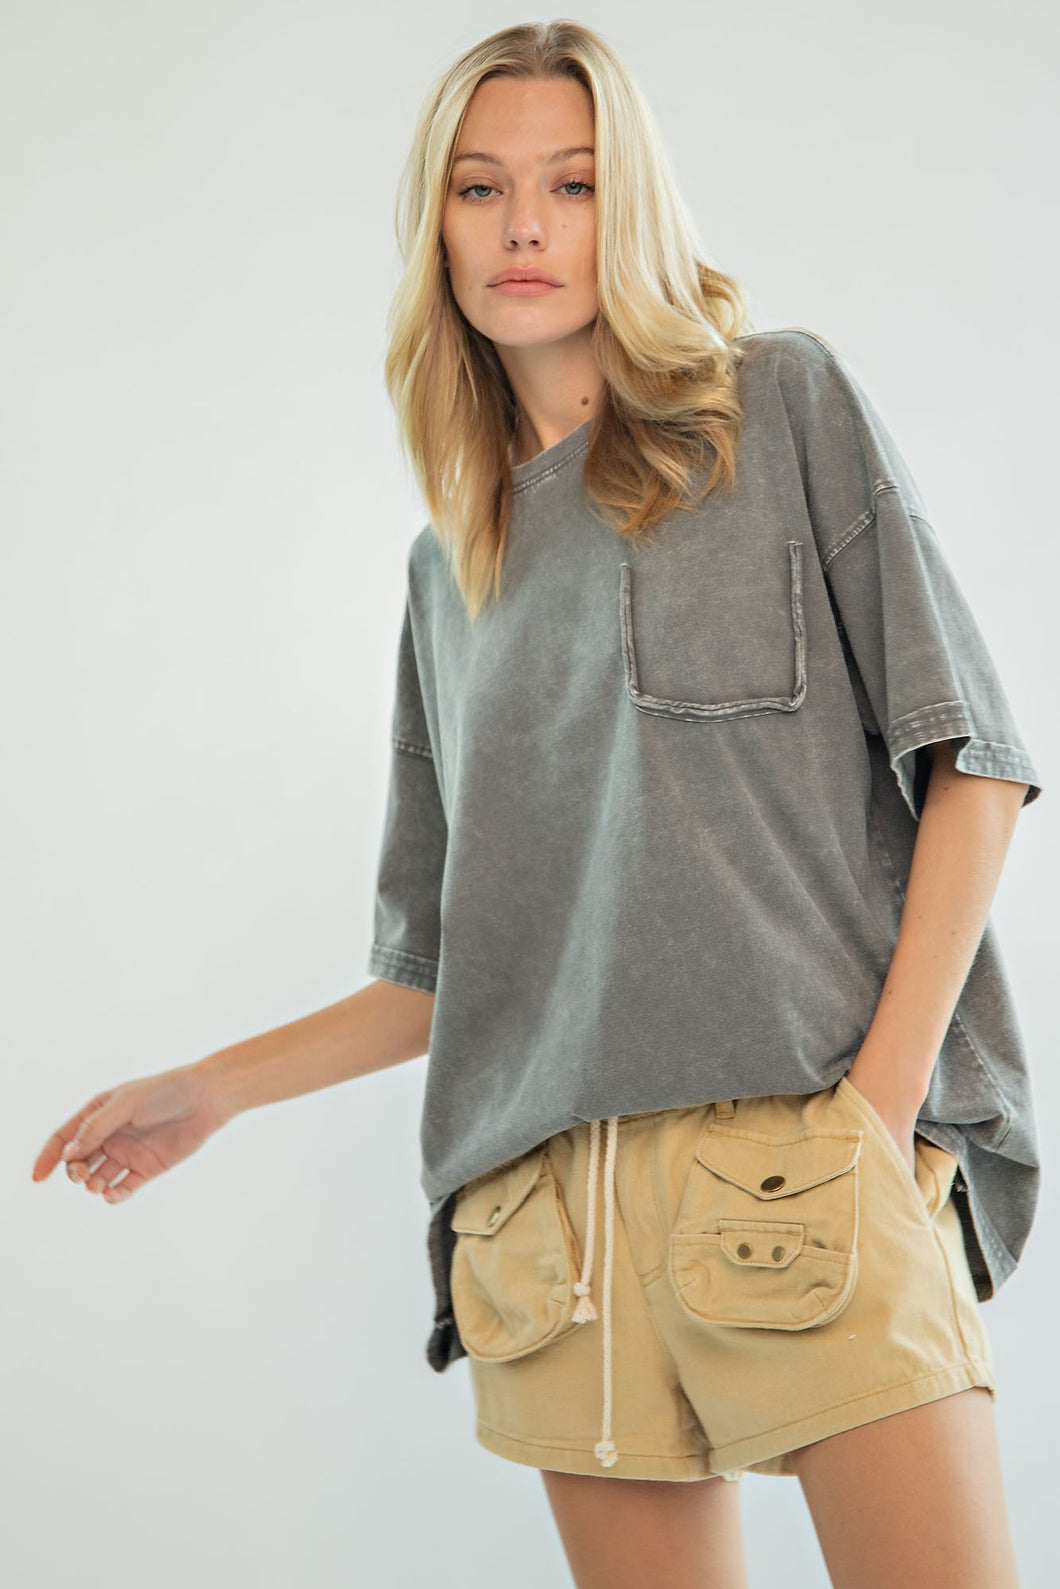 Easel Short Sleeve Mineral Wash Tunic Top in Ash Shirts & Tops Easel   